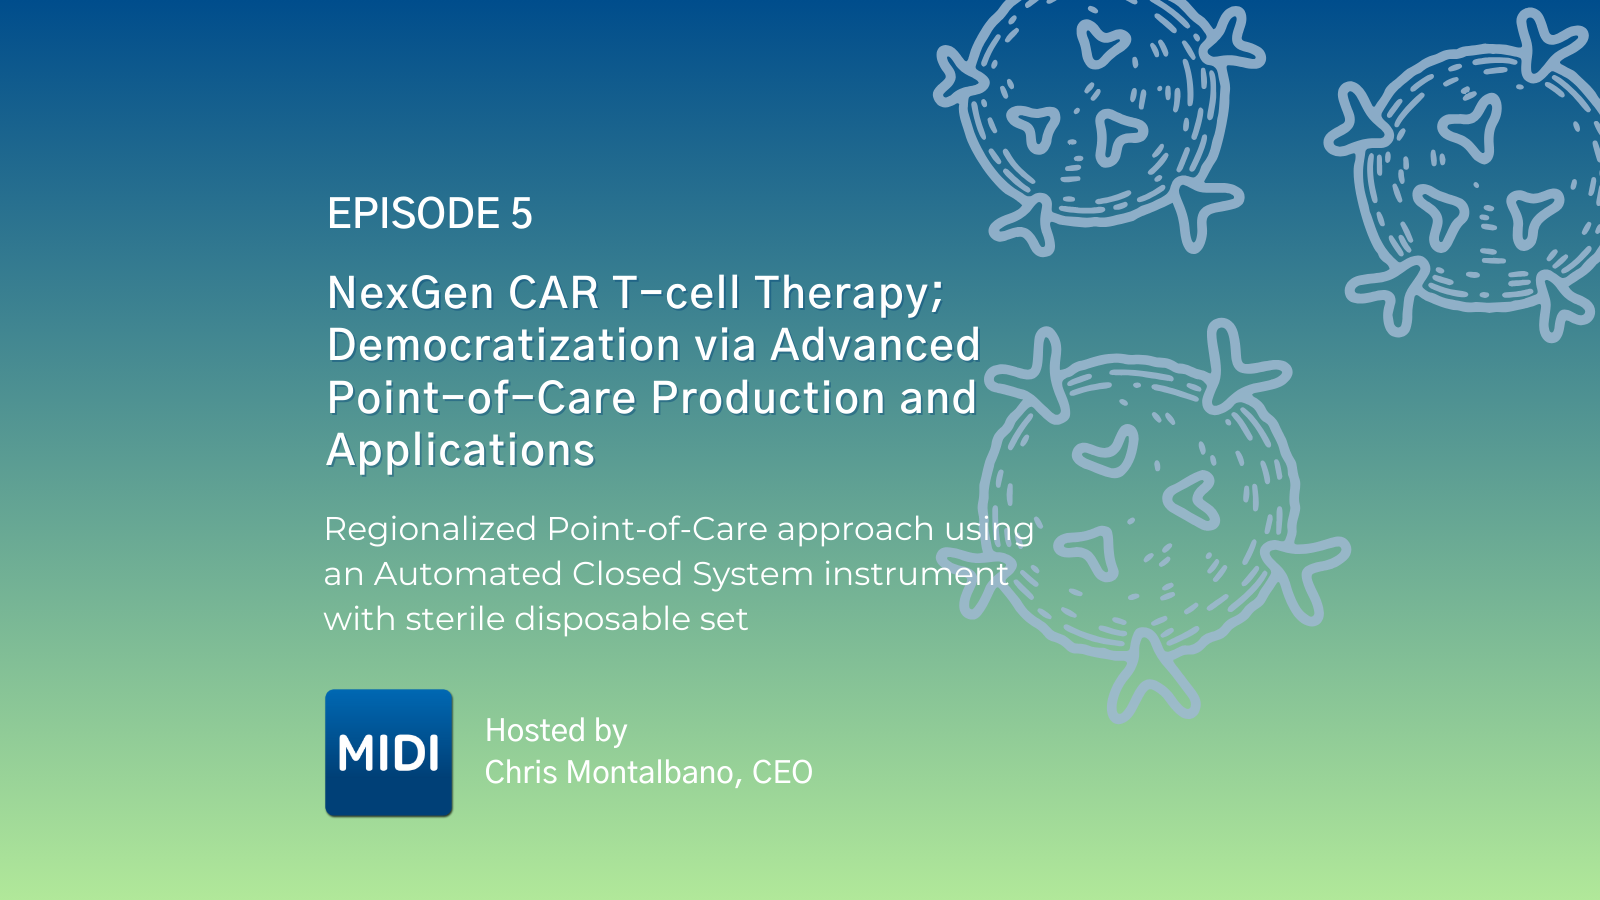 Closed System Automation in a Point-of-Care Approach for CAR T-cell Fabrication}